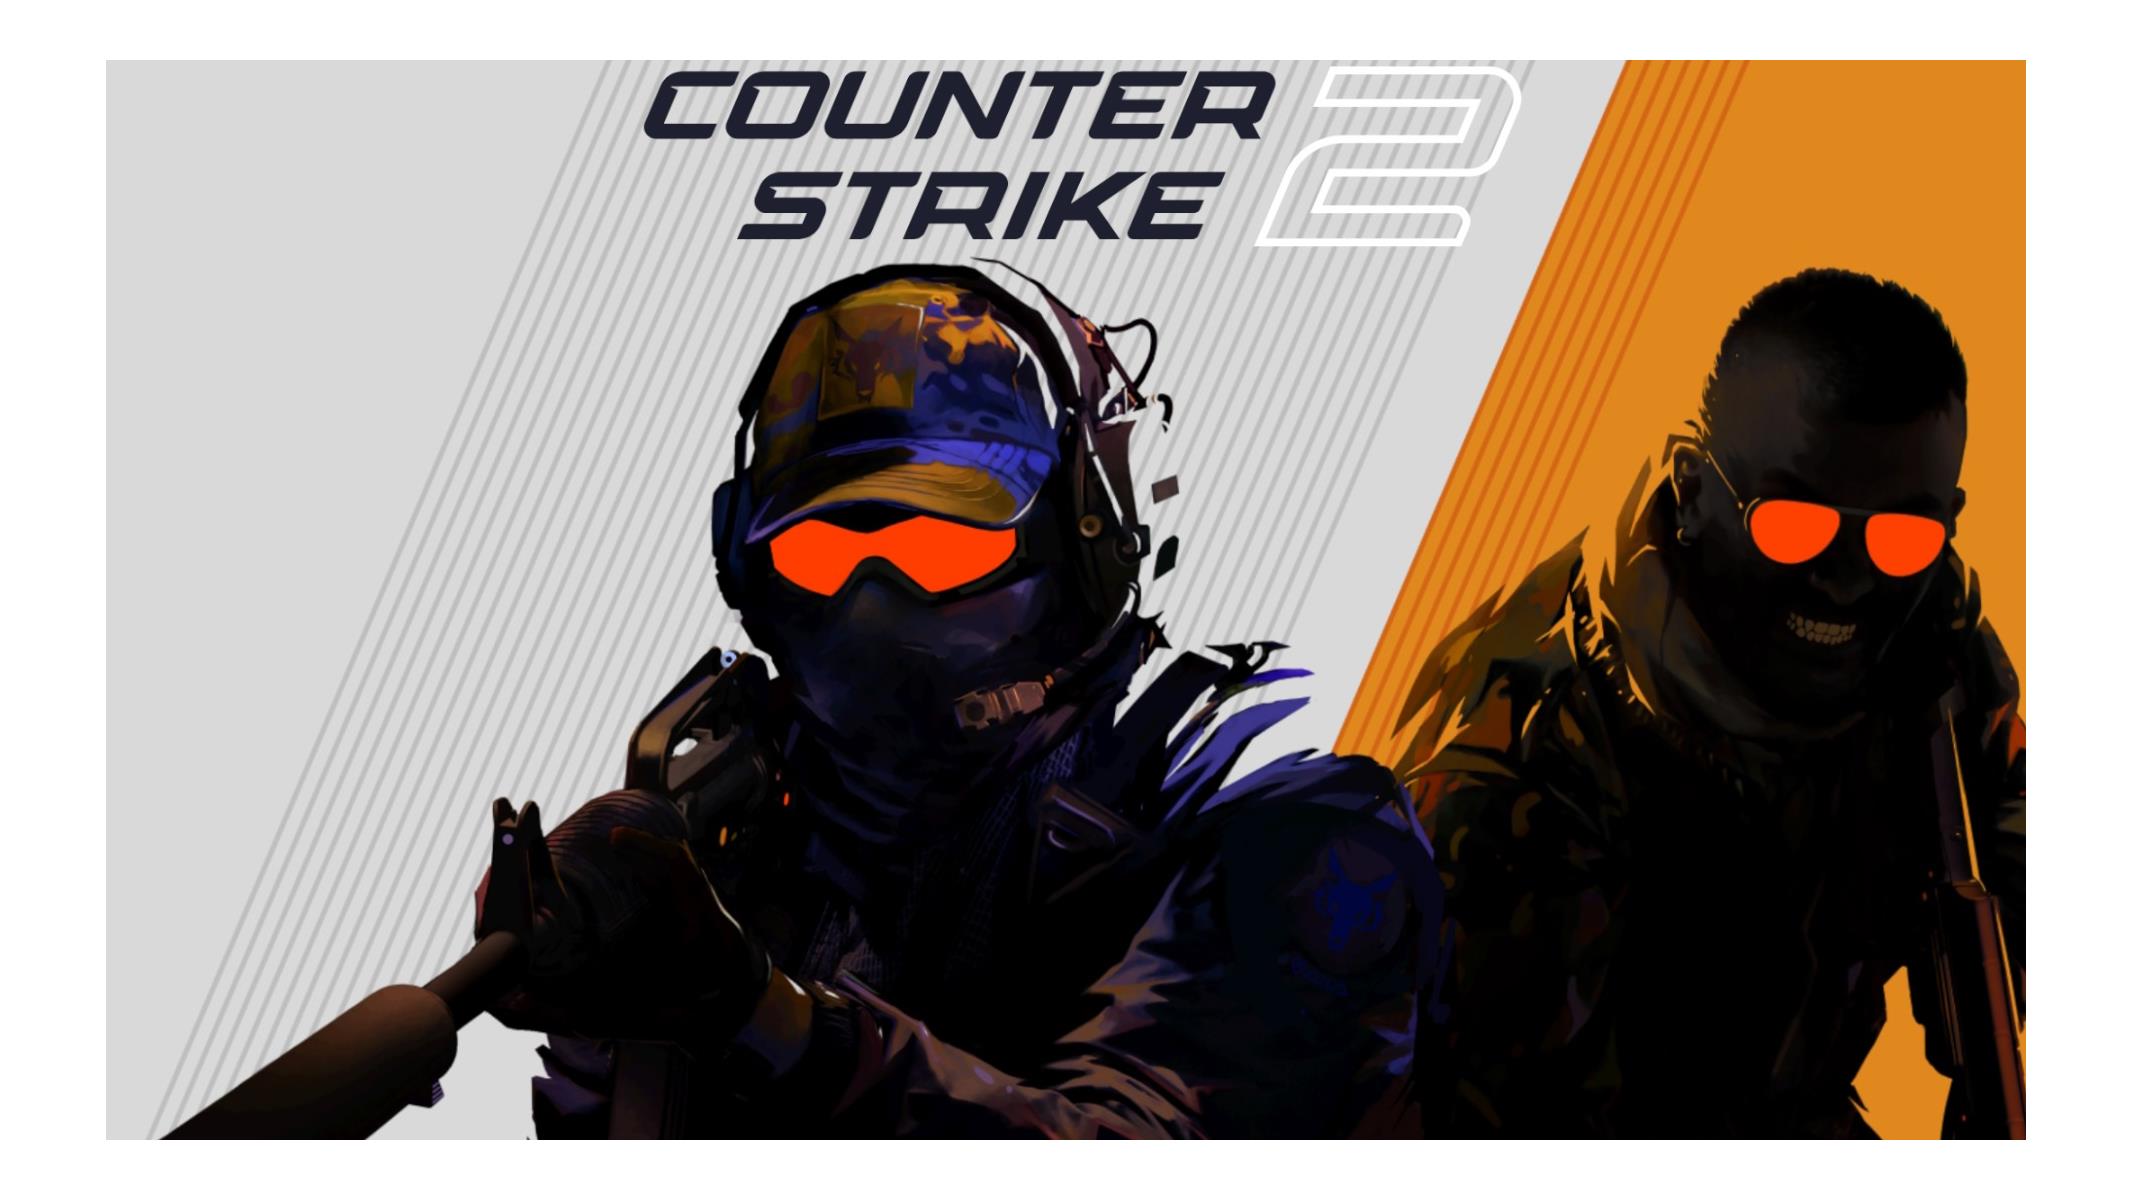 When is the next Counter-Strike 2 beta access wave?